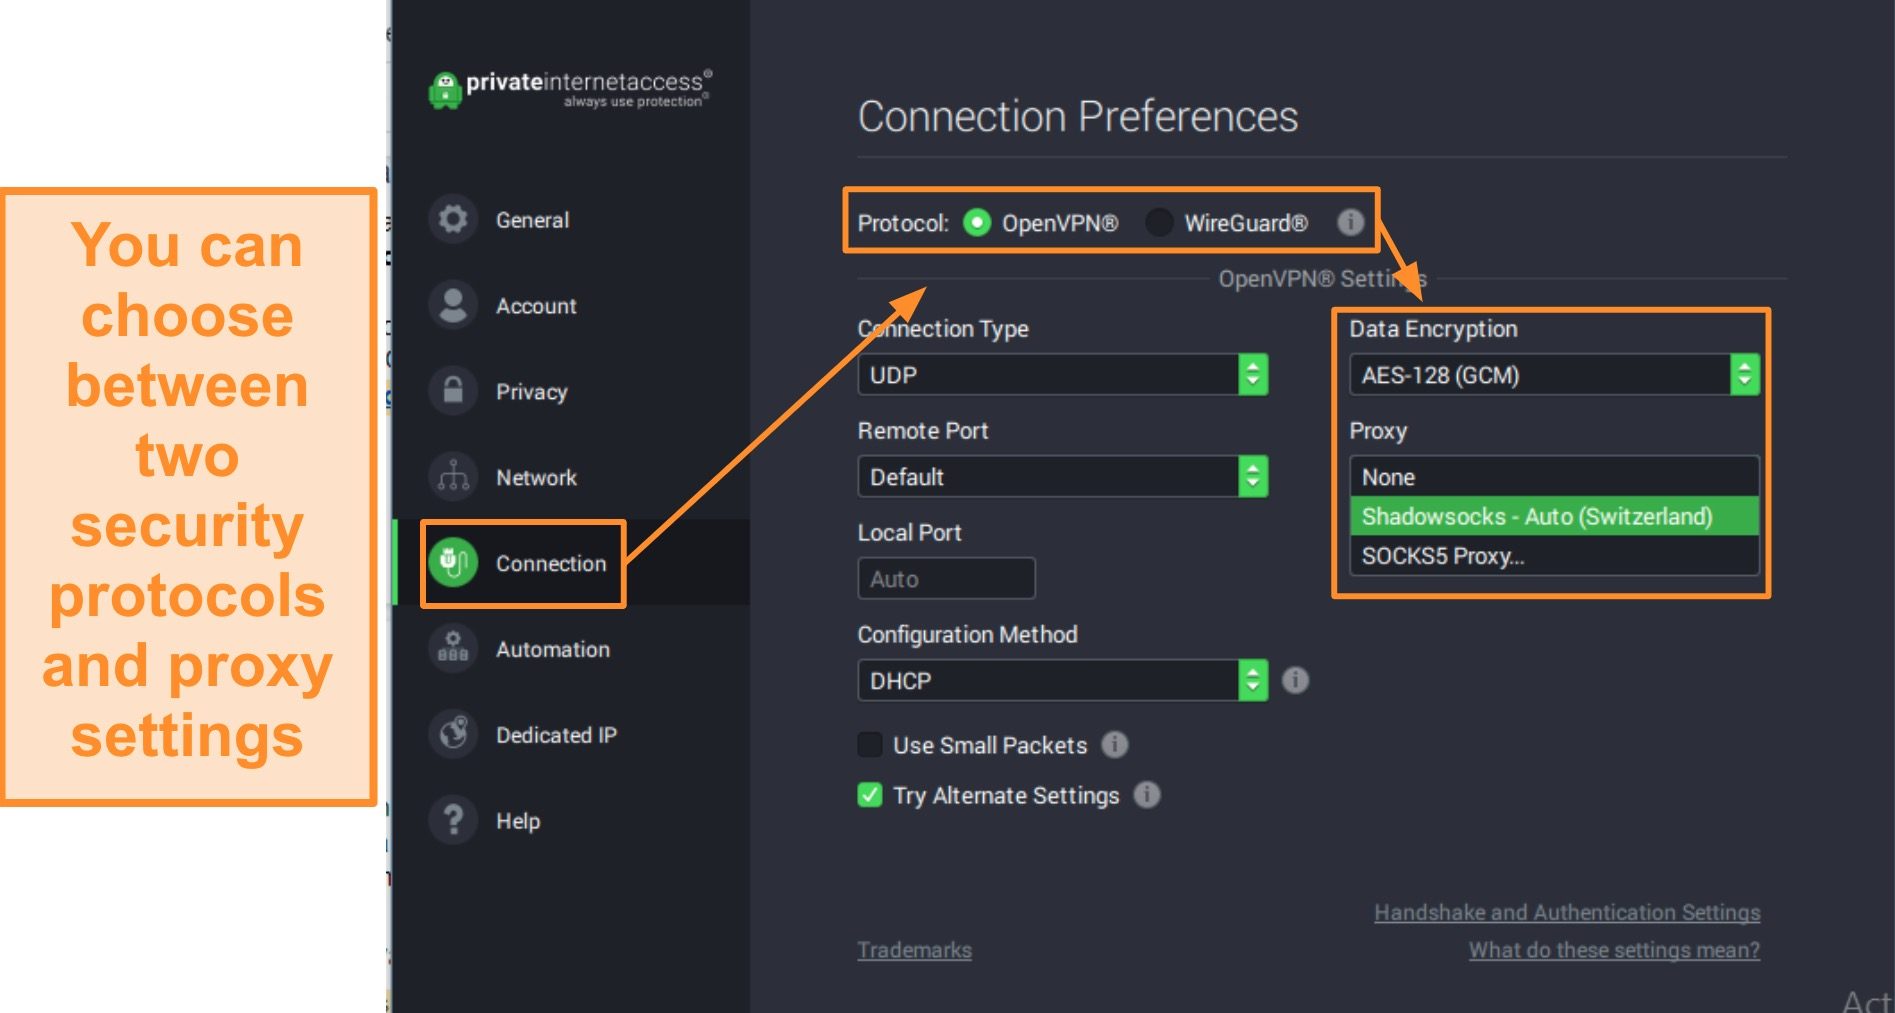 Screenshot of connection preference settings in PIA